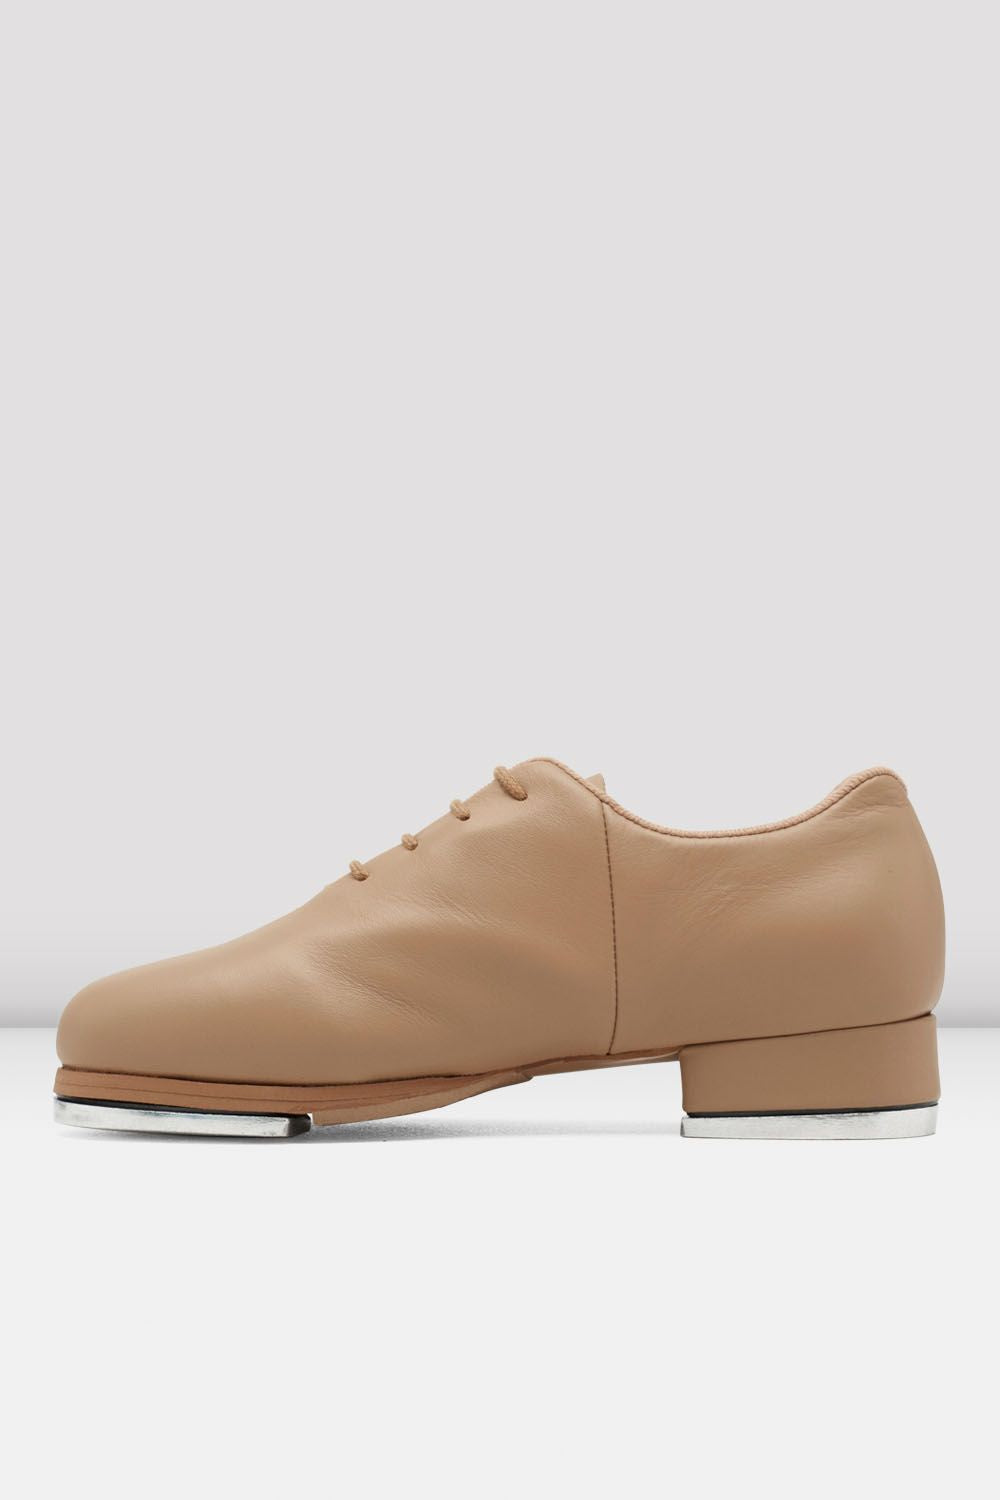 Sync Tap Leather Tap Shoes (Bloch S0321)